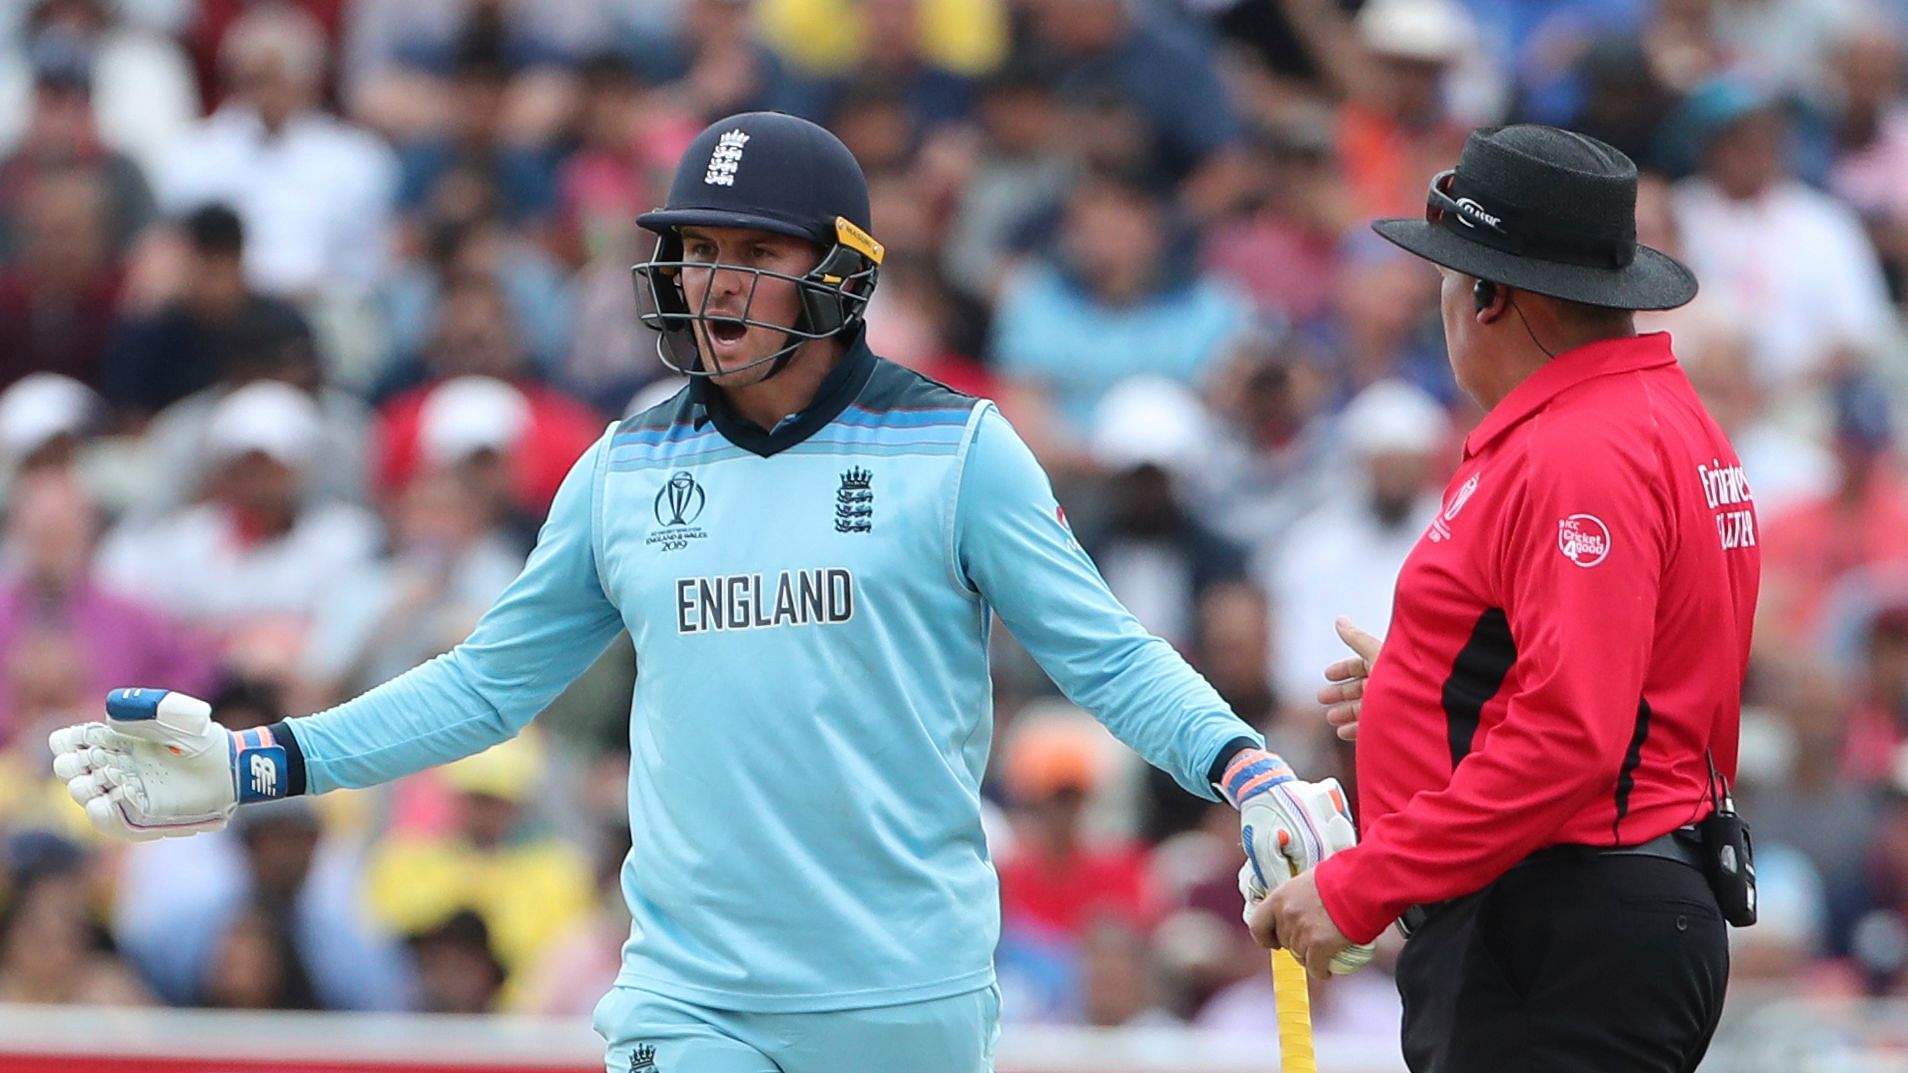 England opener Jason Roy was fined 30 percent of his match fee for breaching Level One of the ICC Code of Conduct during the World Cup semi-final.